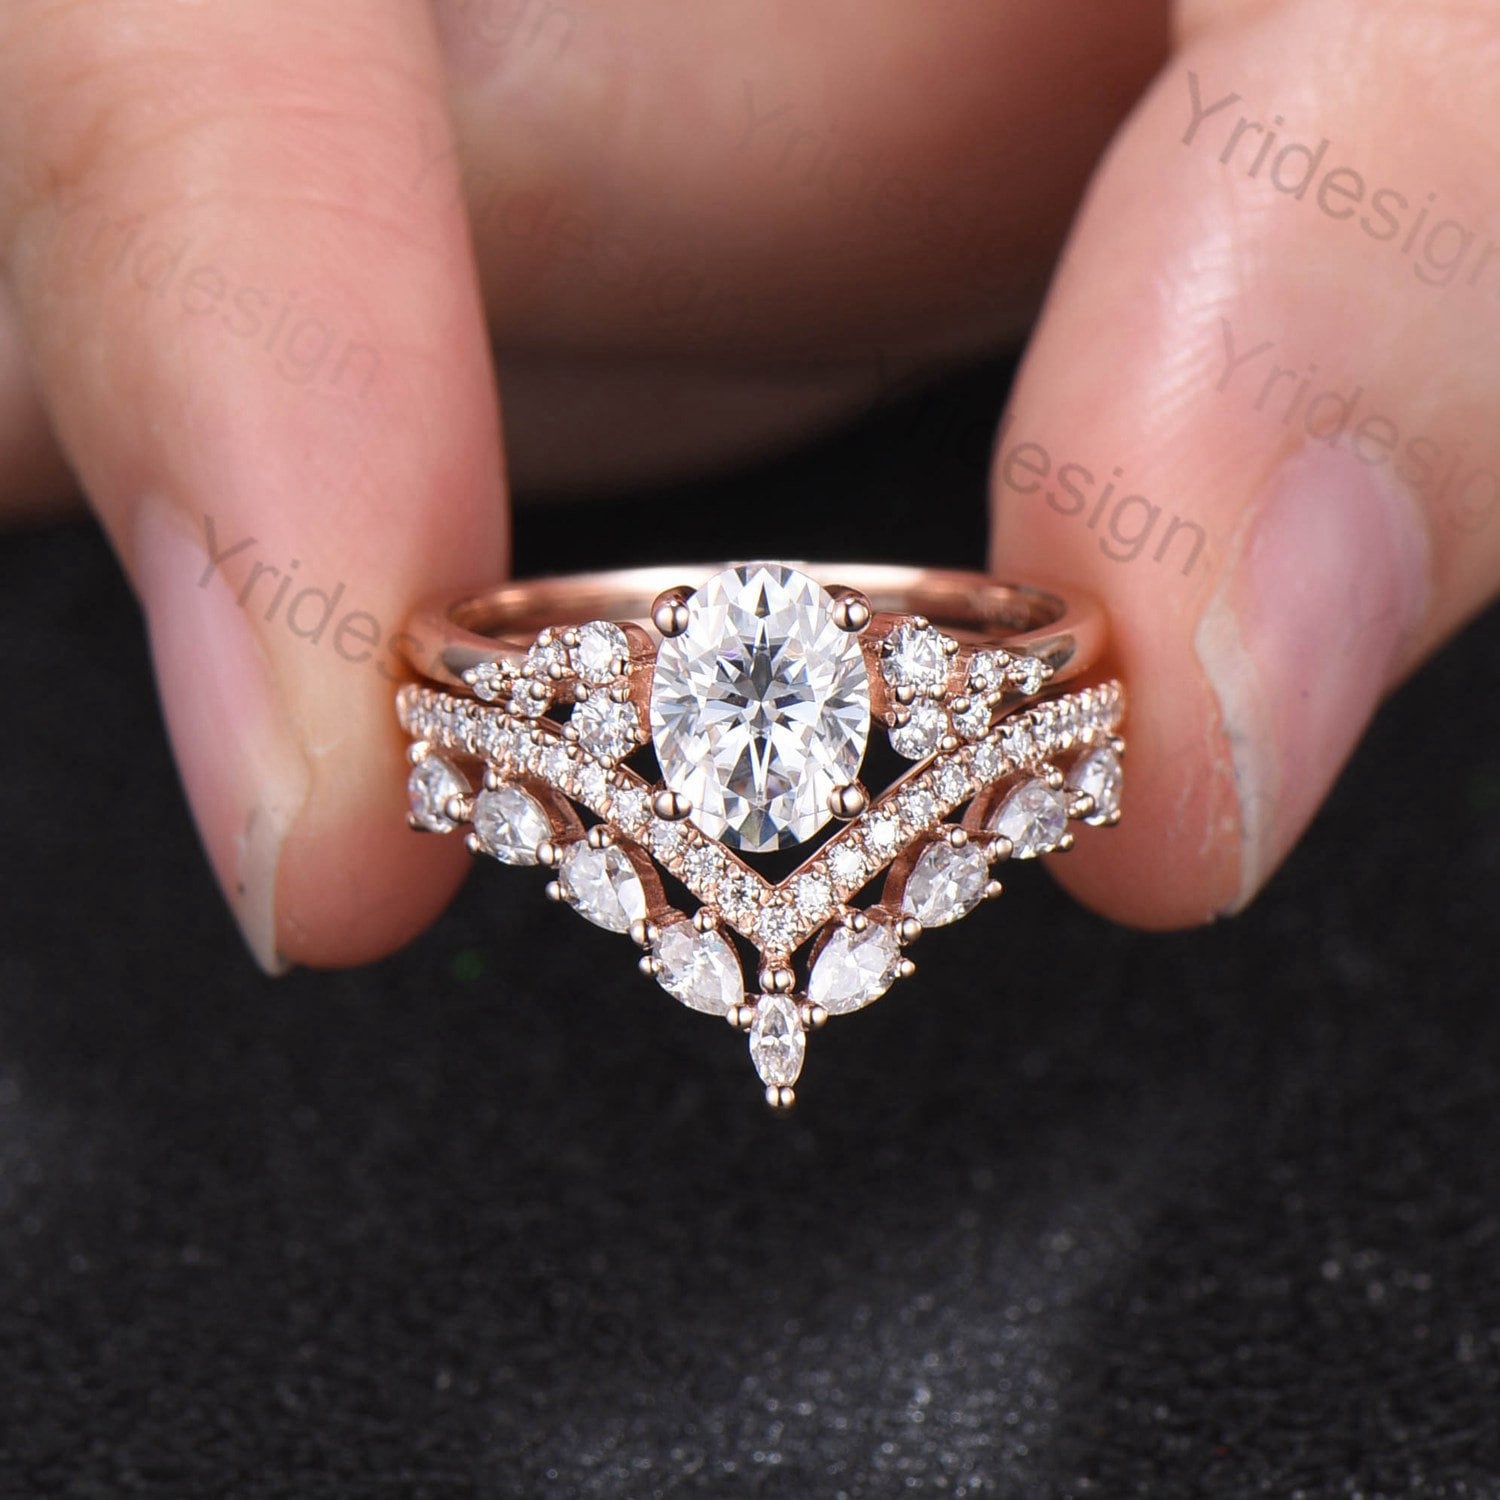 Super stylish rose gold ring with 1ct solitaire -